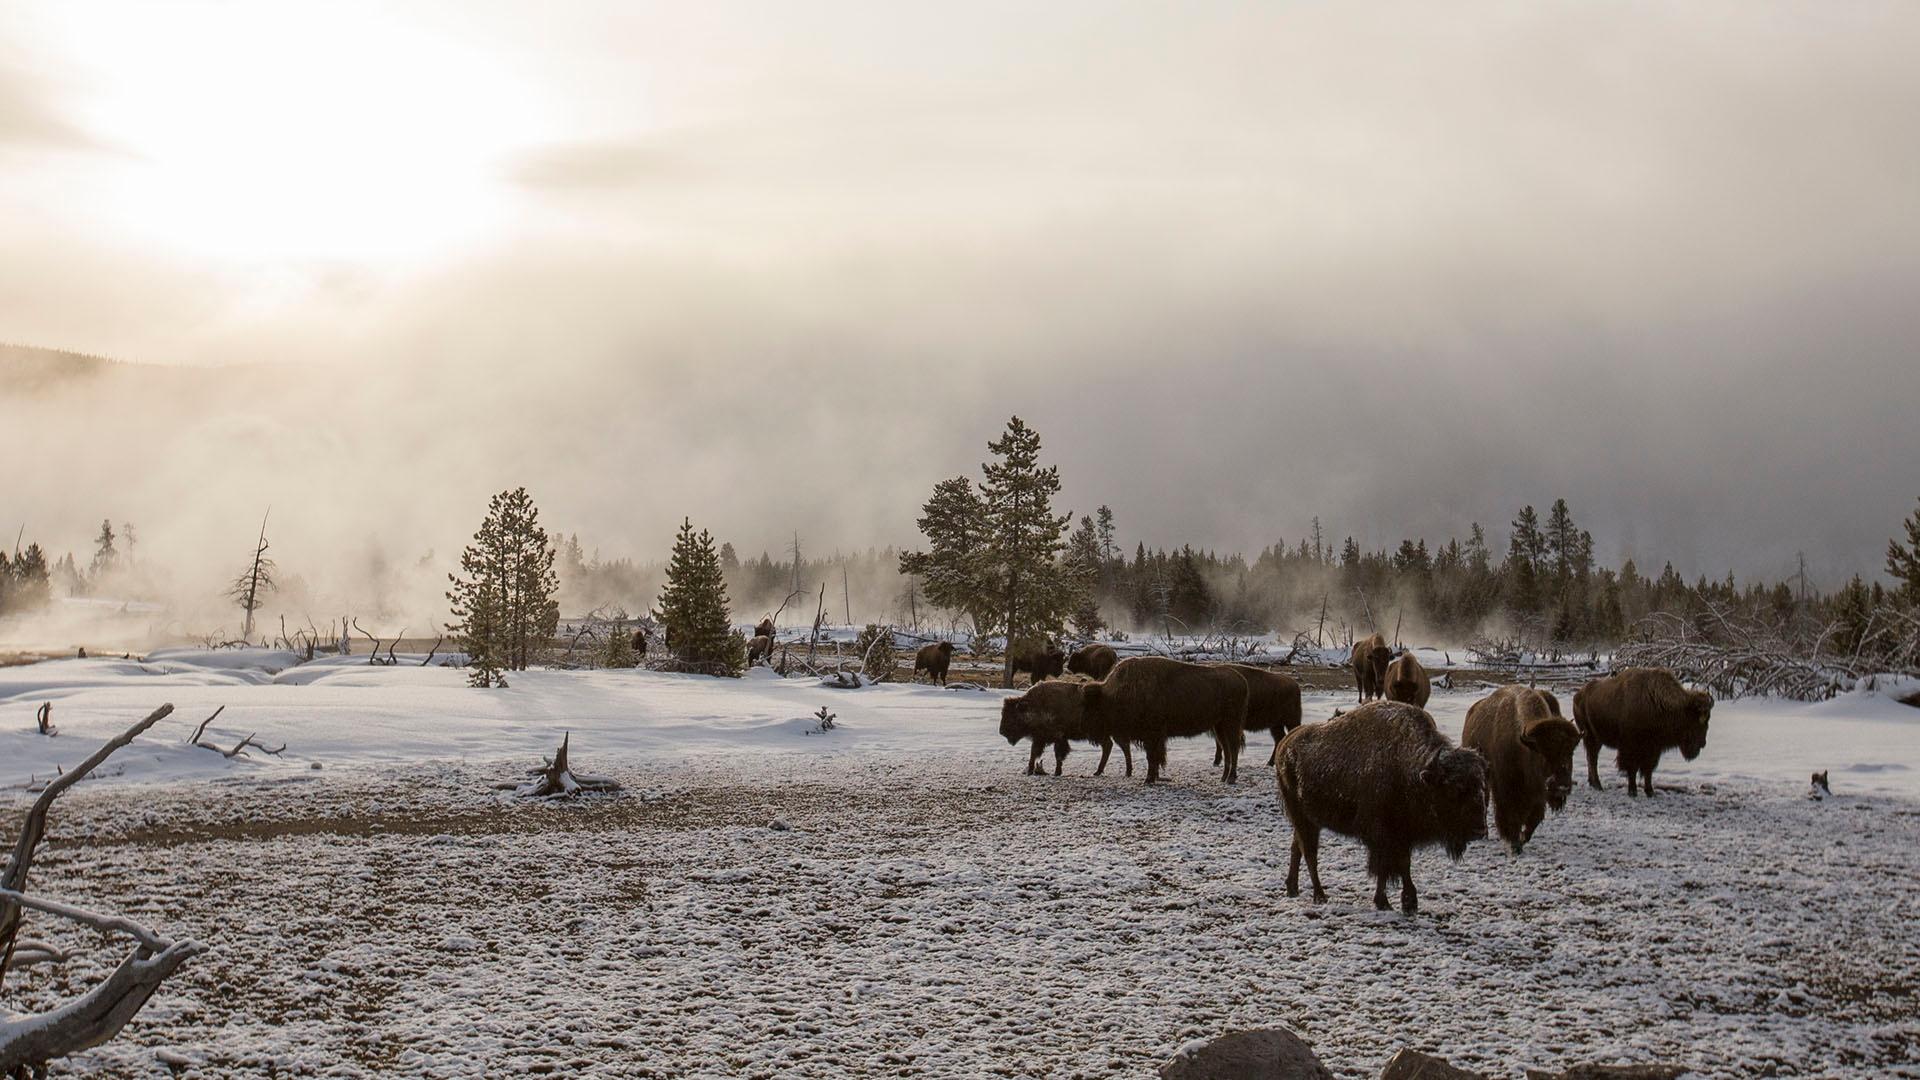 Bison endure winter with geysers nearby.